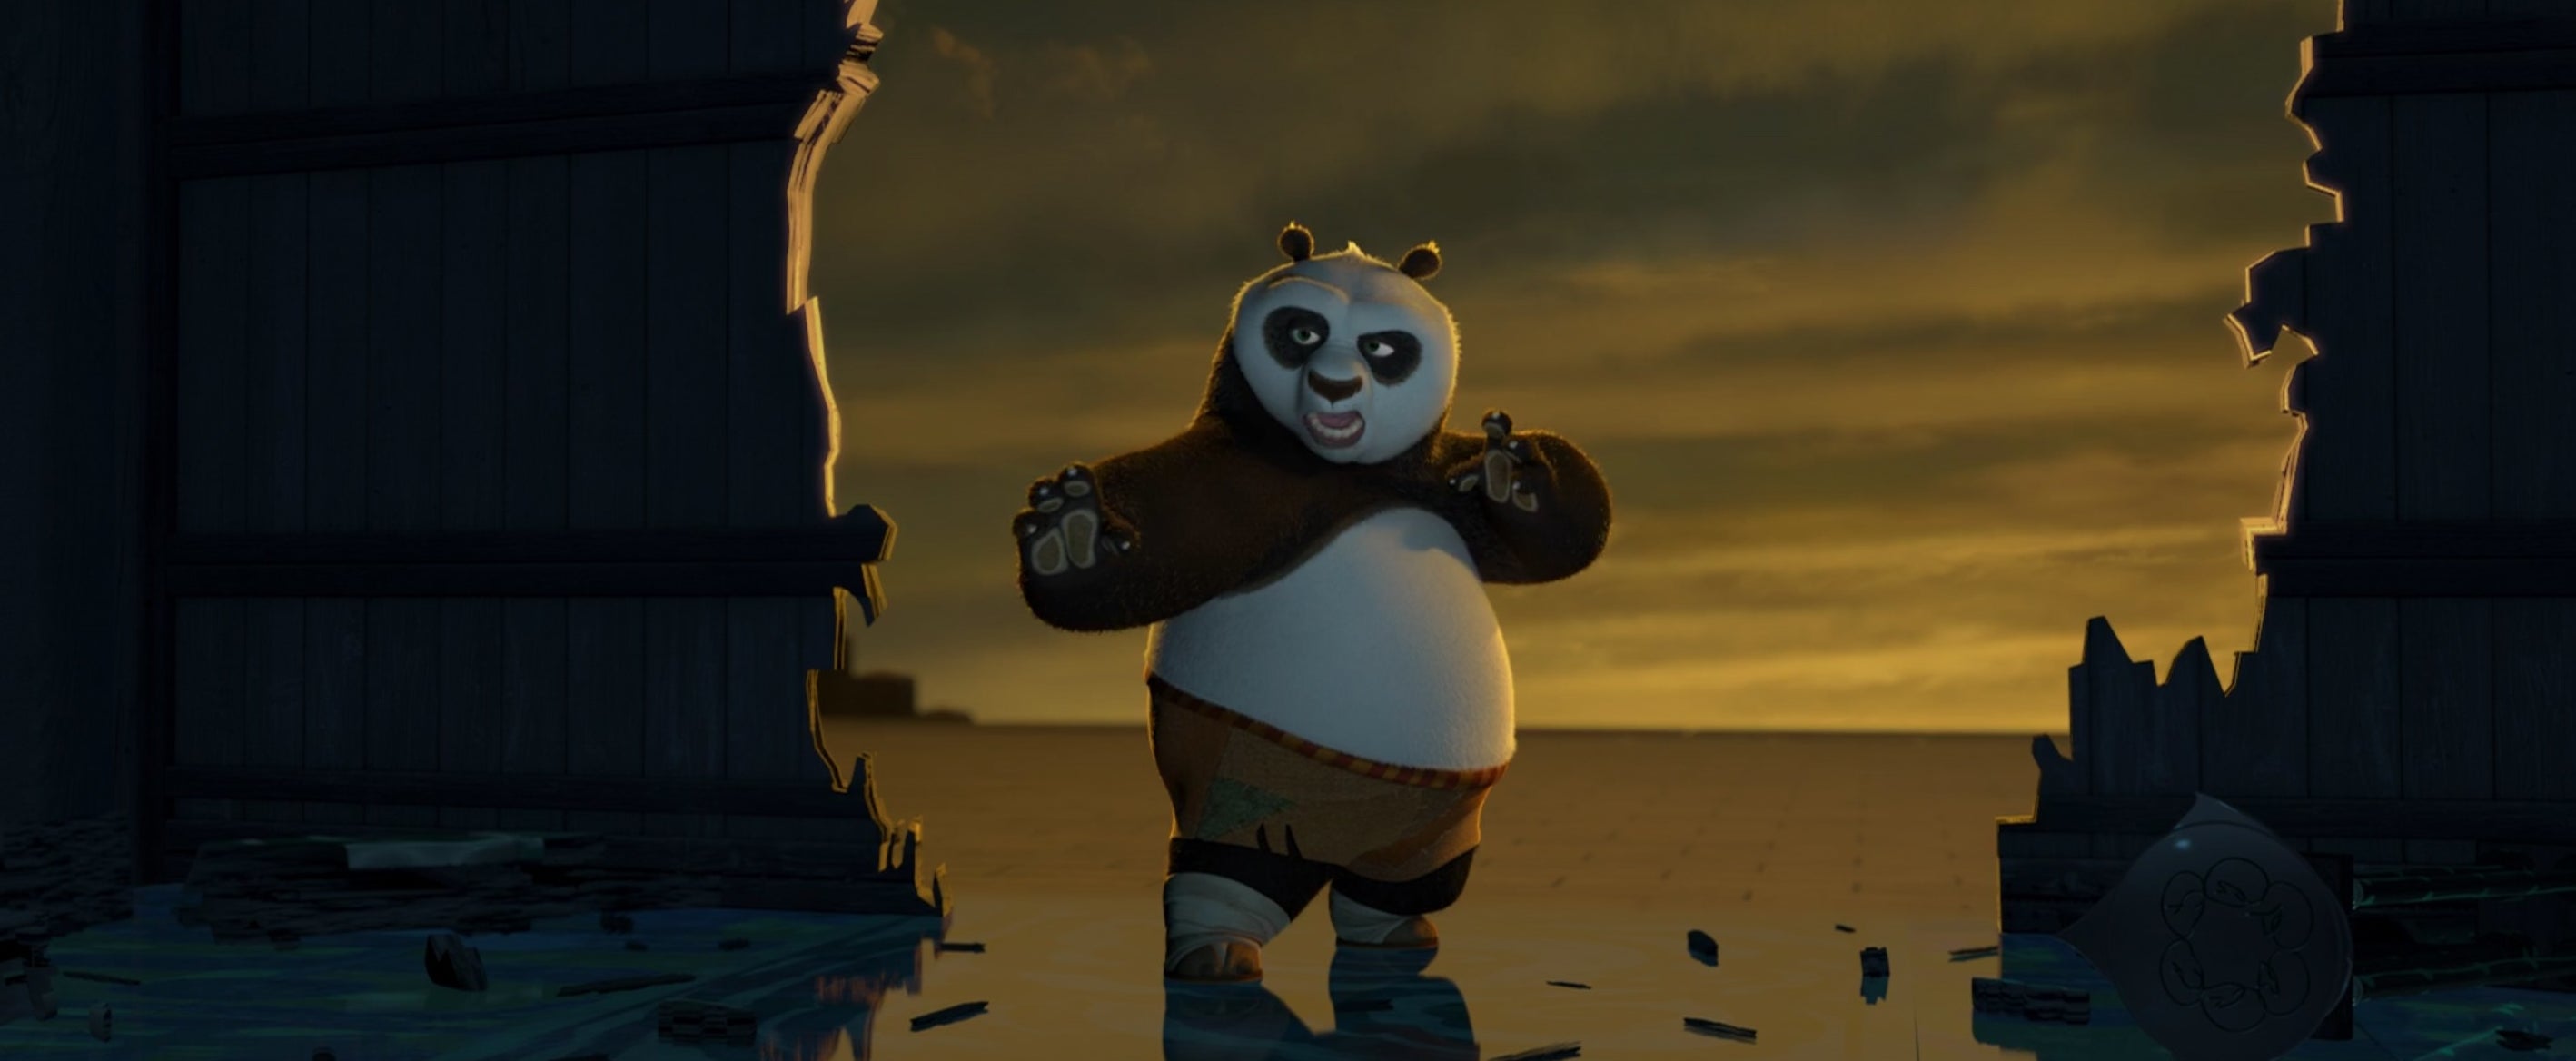 An animated panda in a kung fu posture